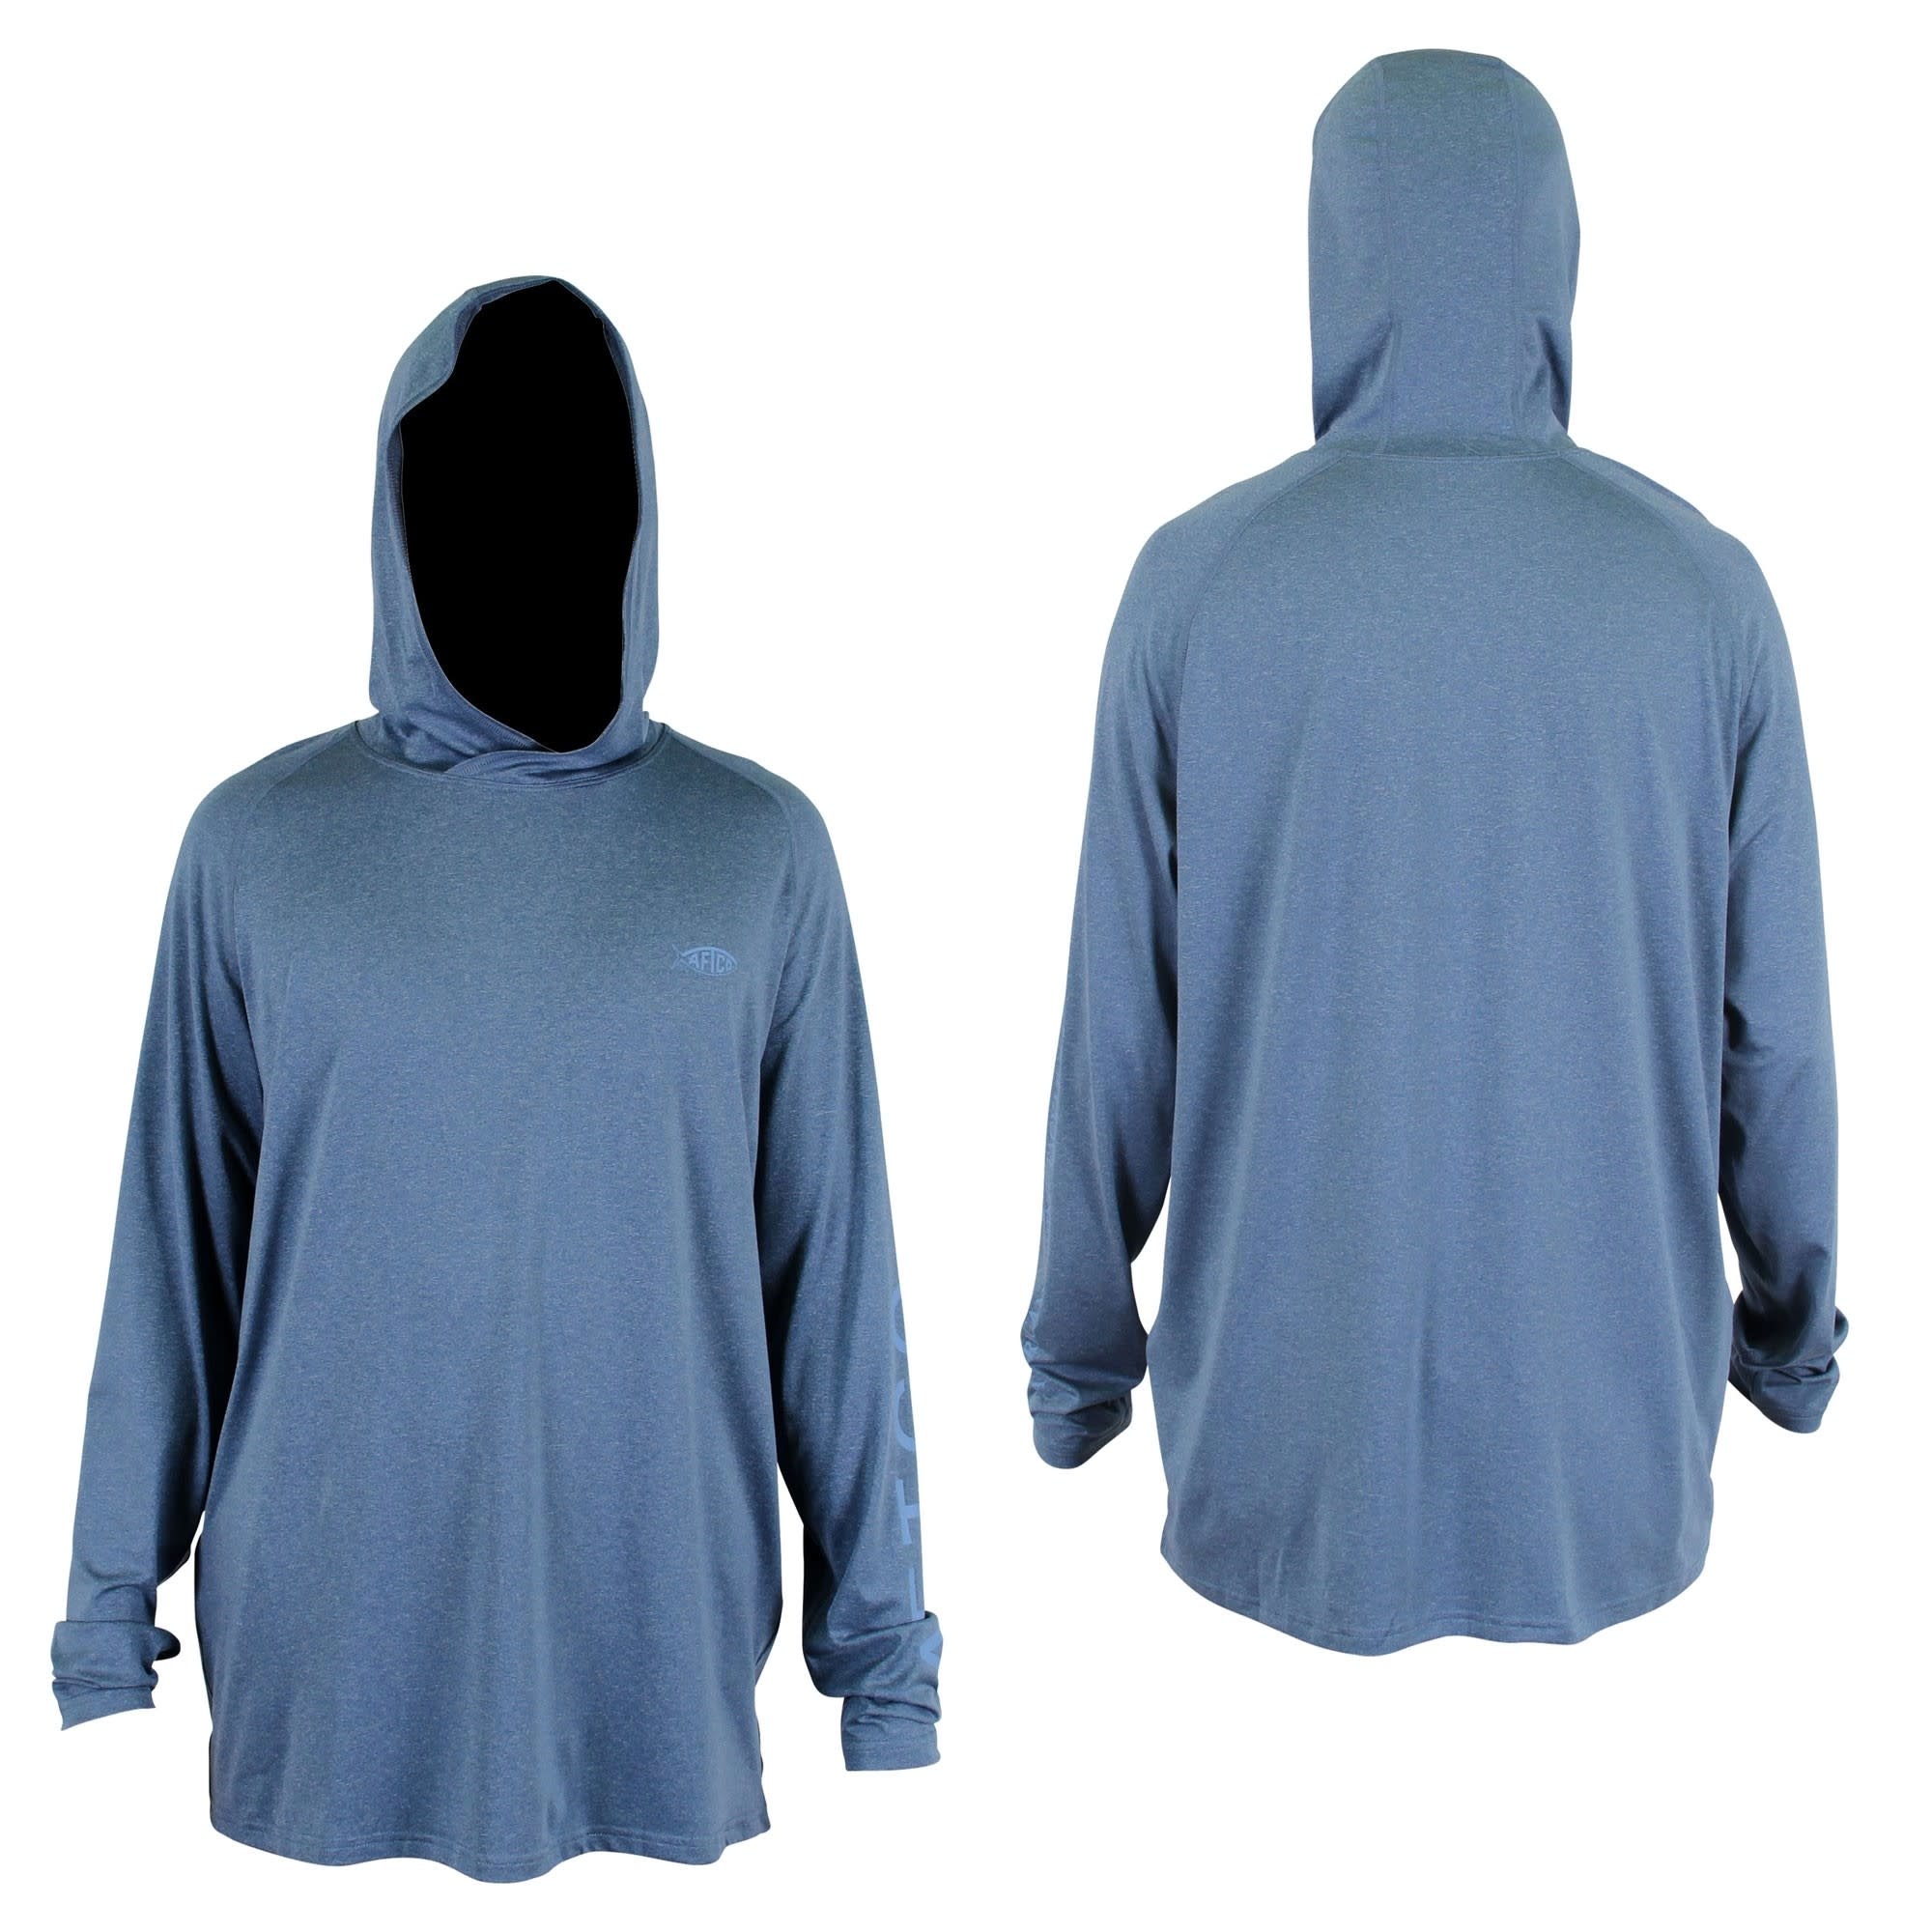 Aftco Aftco Samurai Hooded LS Shirt Space Blue Heather